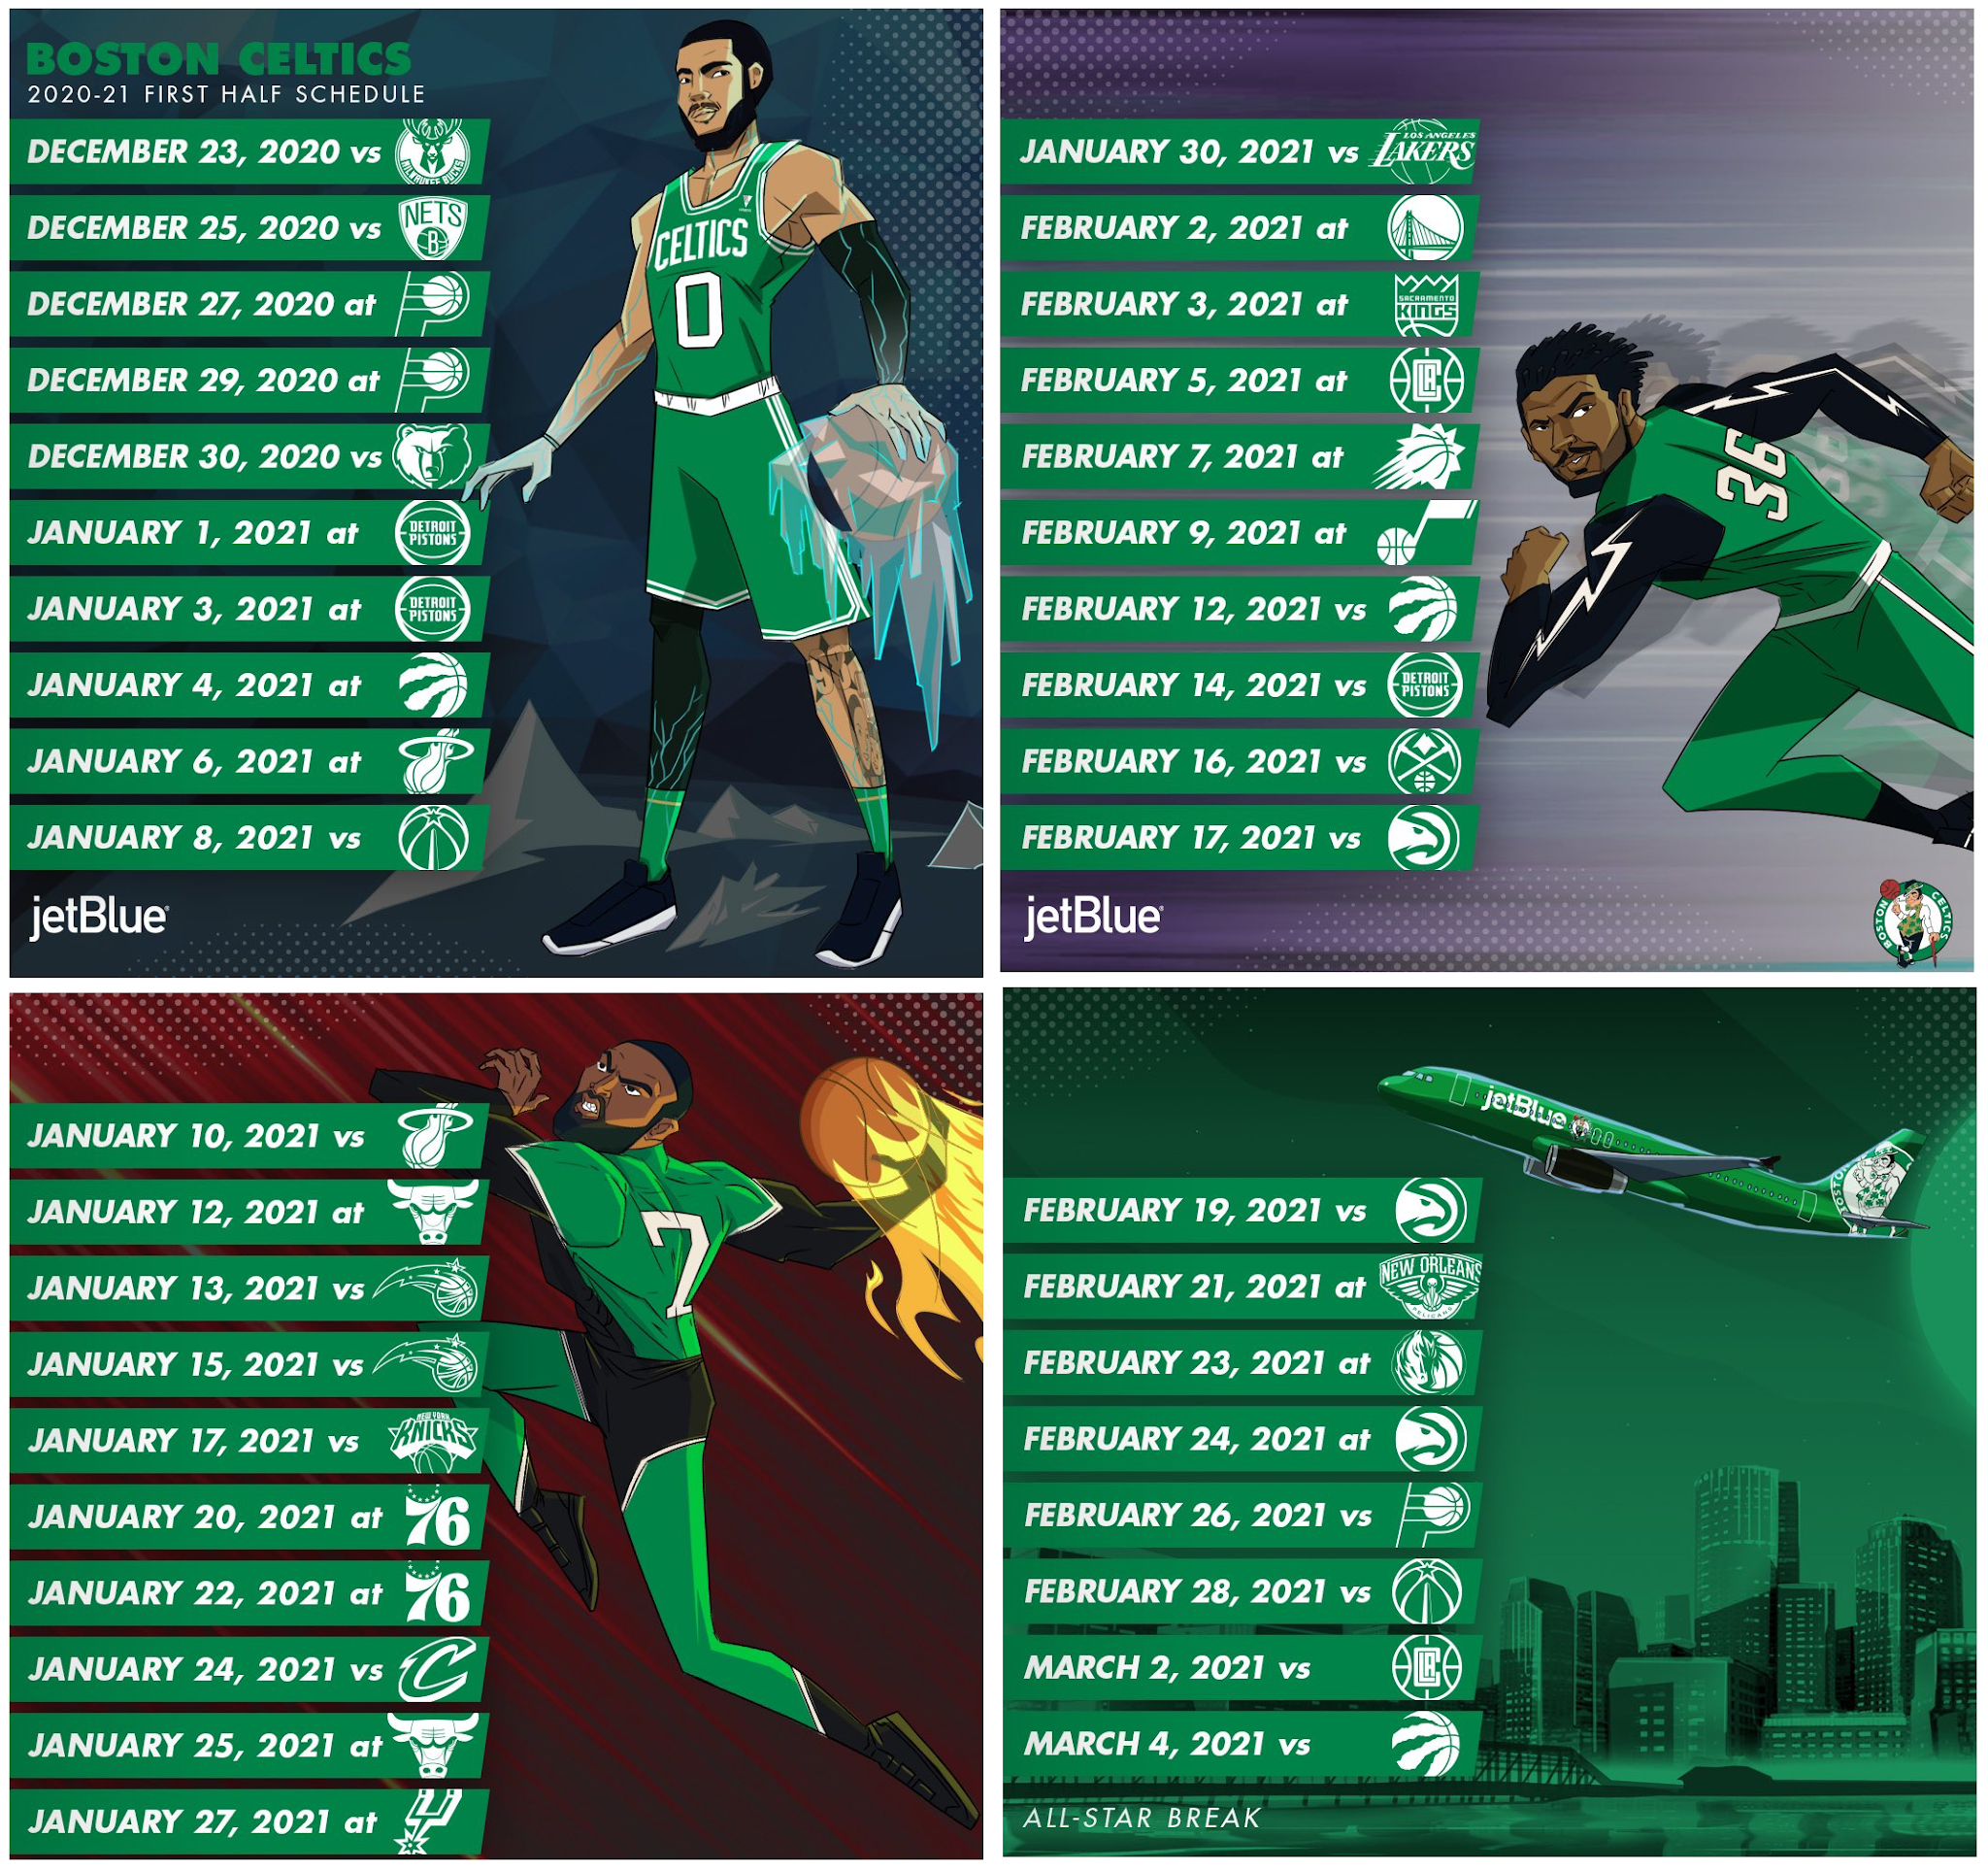 Celtics release schedule for the first half of the season | CelticsLife